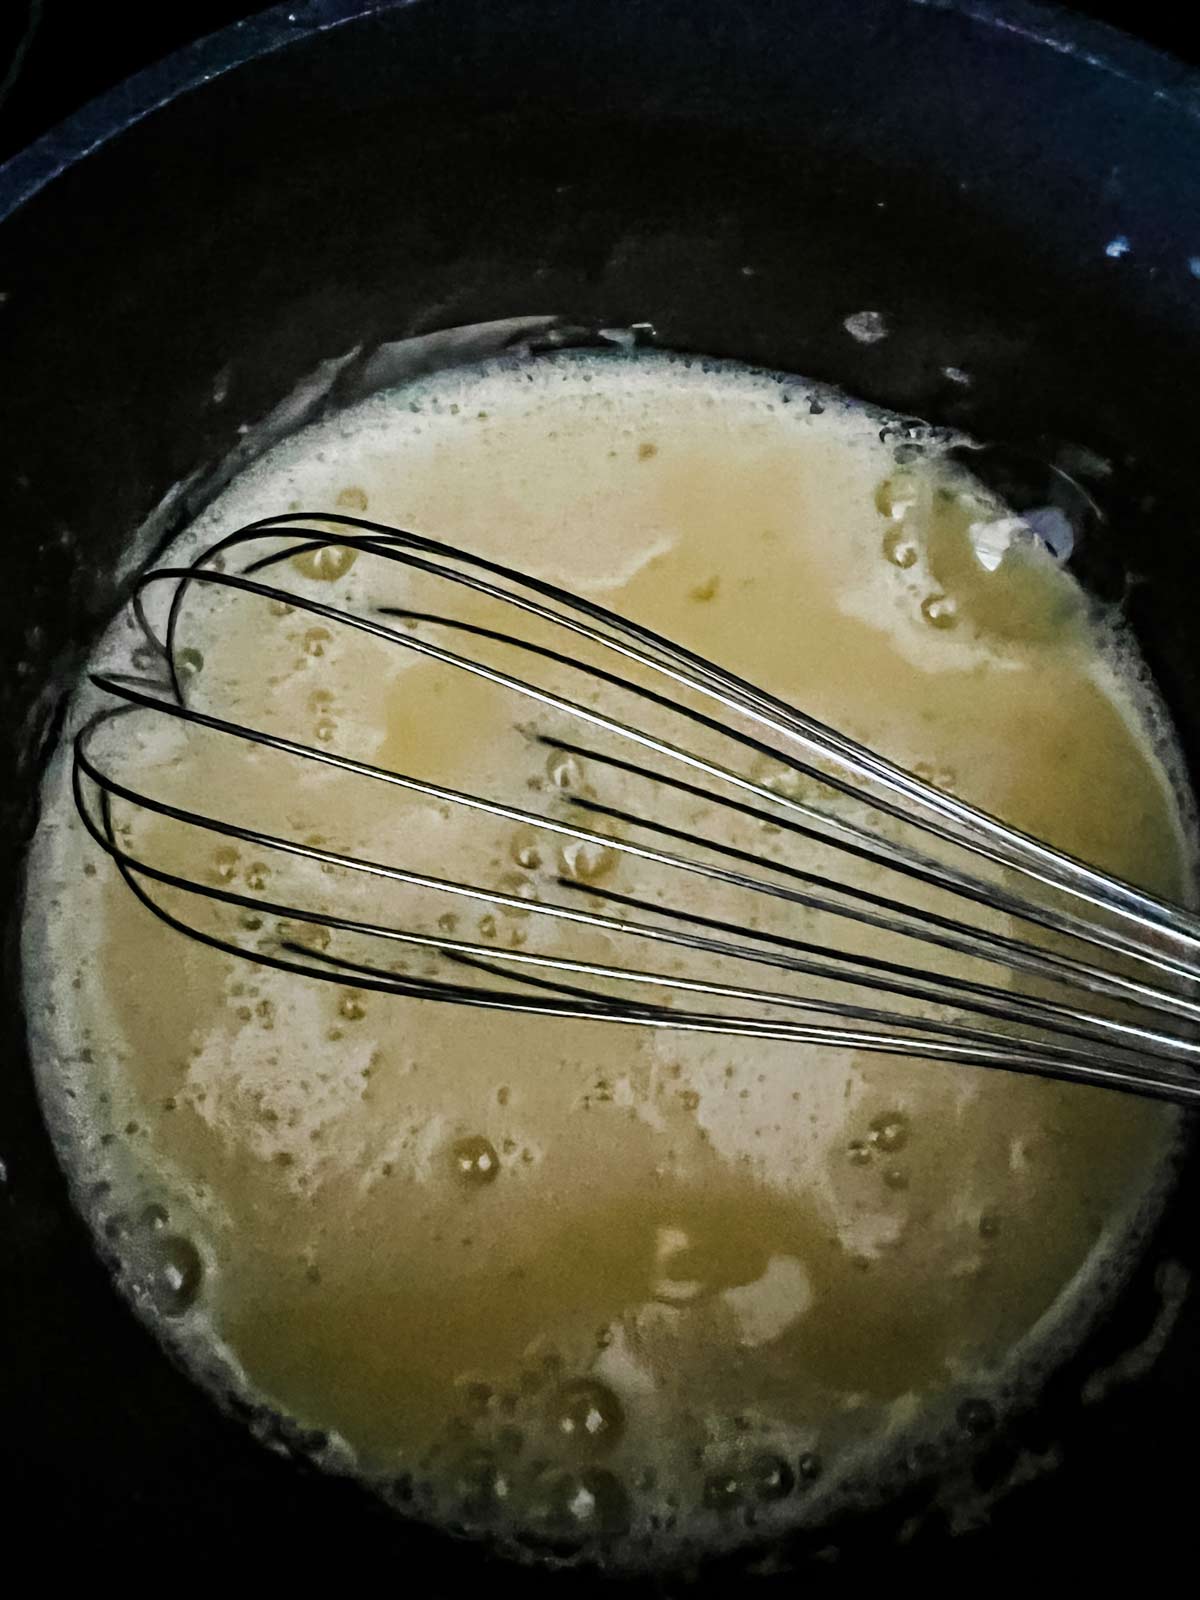 A mixture of milk, sugar, and eggs that have been mixed off the heat and are now cooking in a saucepan.